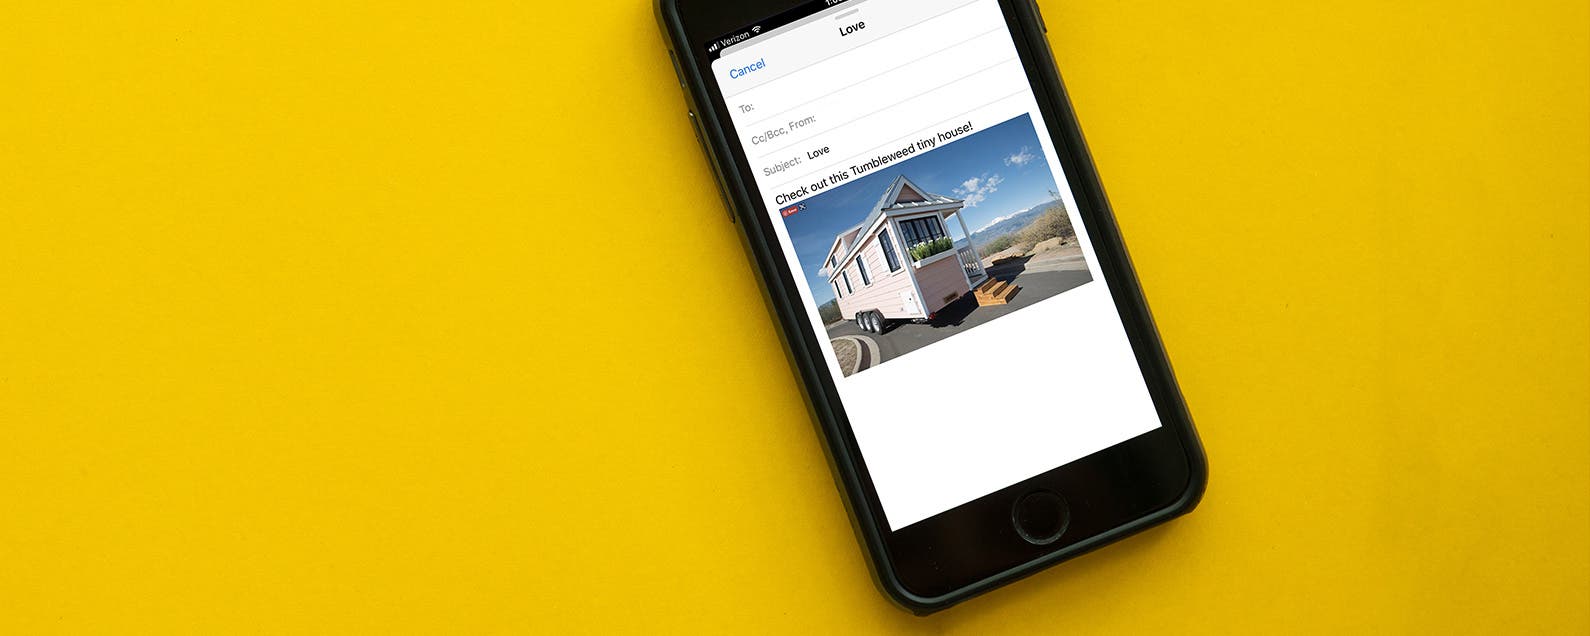 How to Add Attachments in Mail on the iPhone